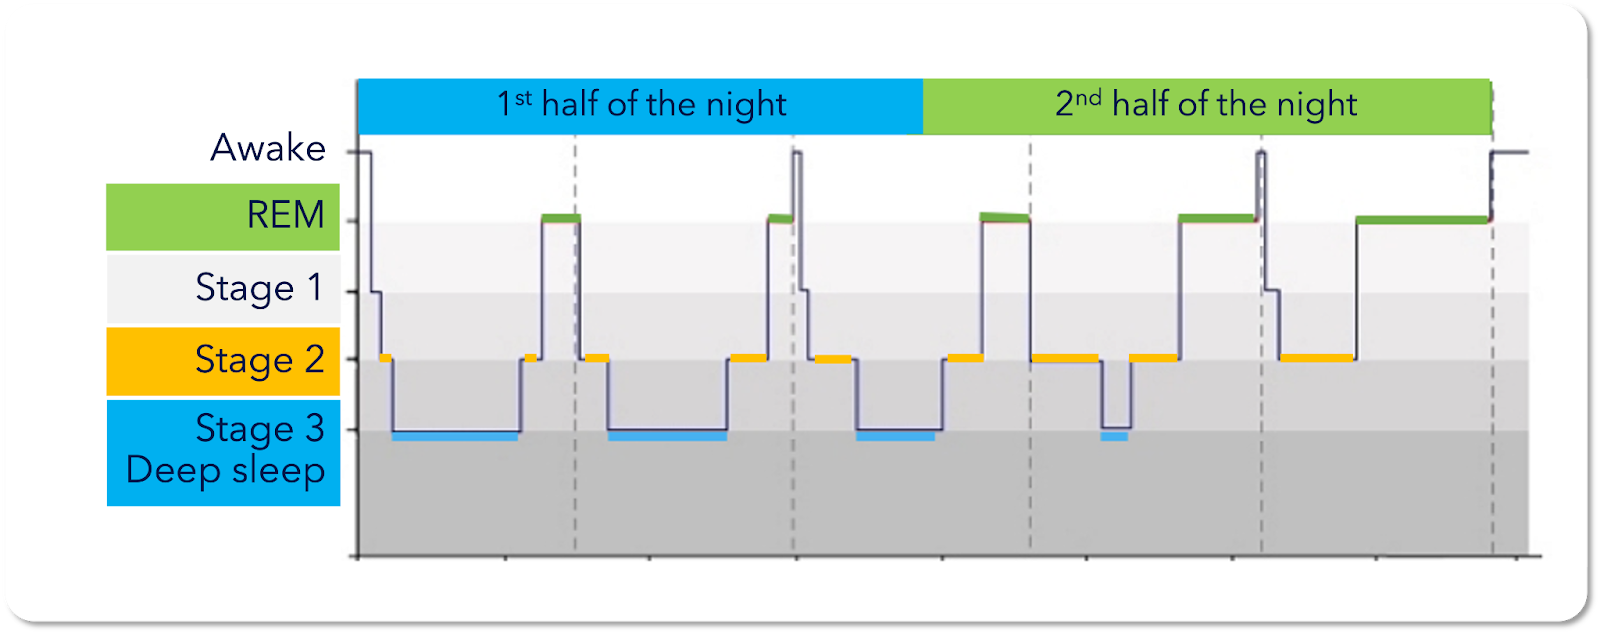 Infographic detailing the different stages of sleep humans experience during the first and second half of their sleep cycles.